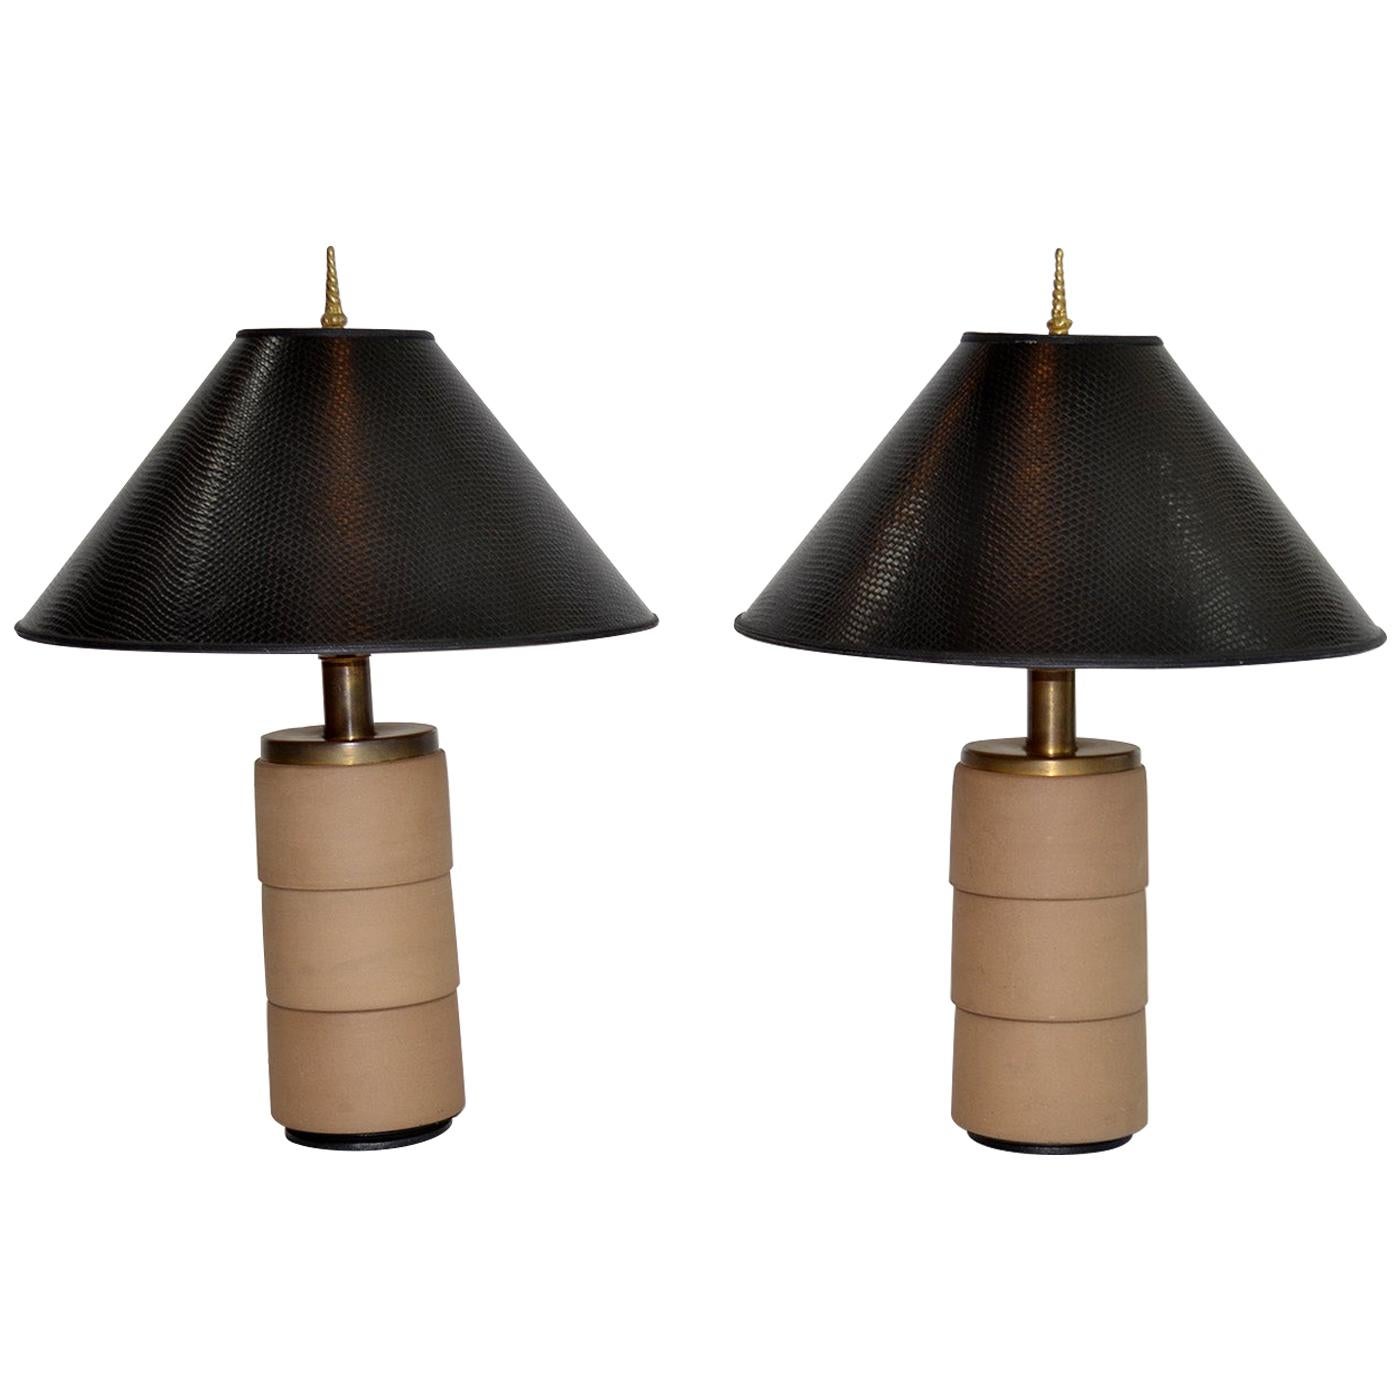 Pair of California Mid-Century Modern Pottery and Brass Table Lamps